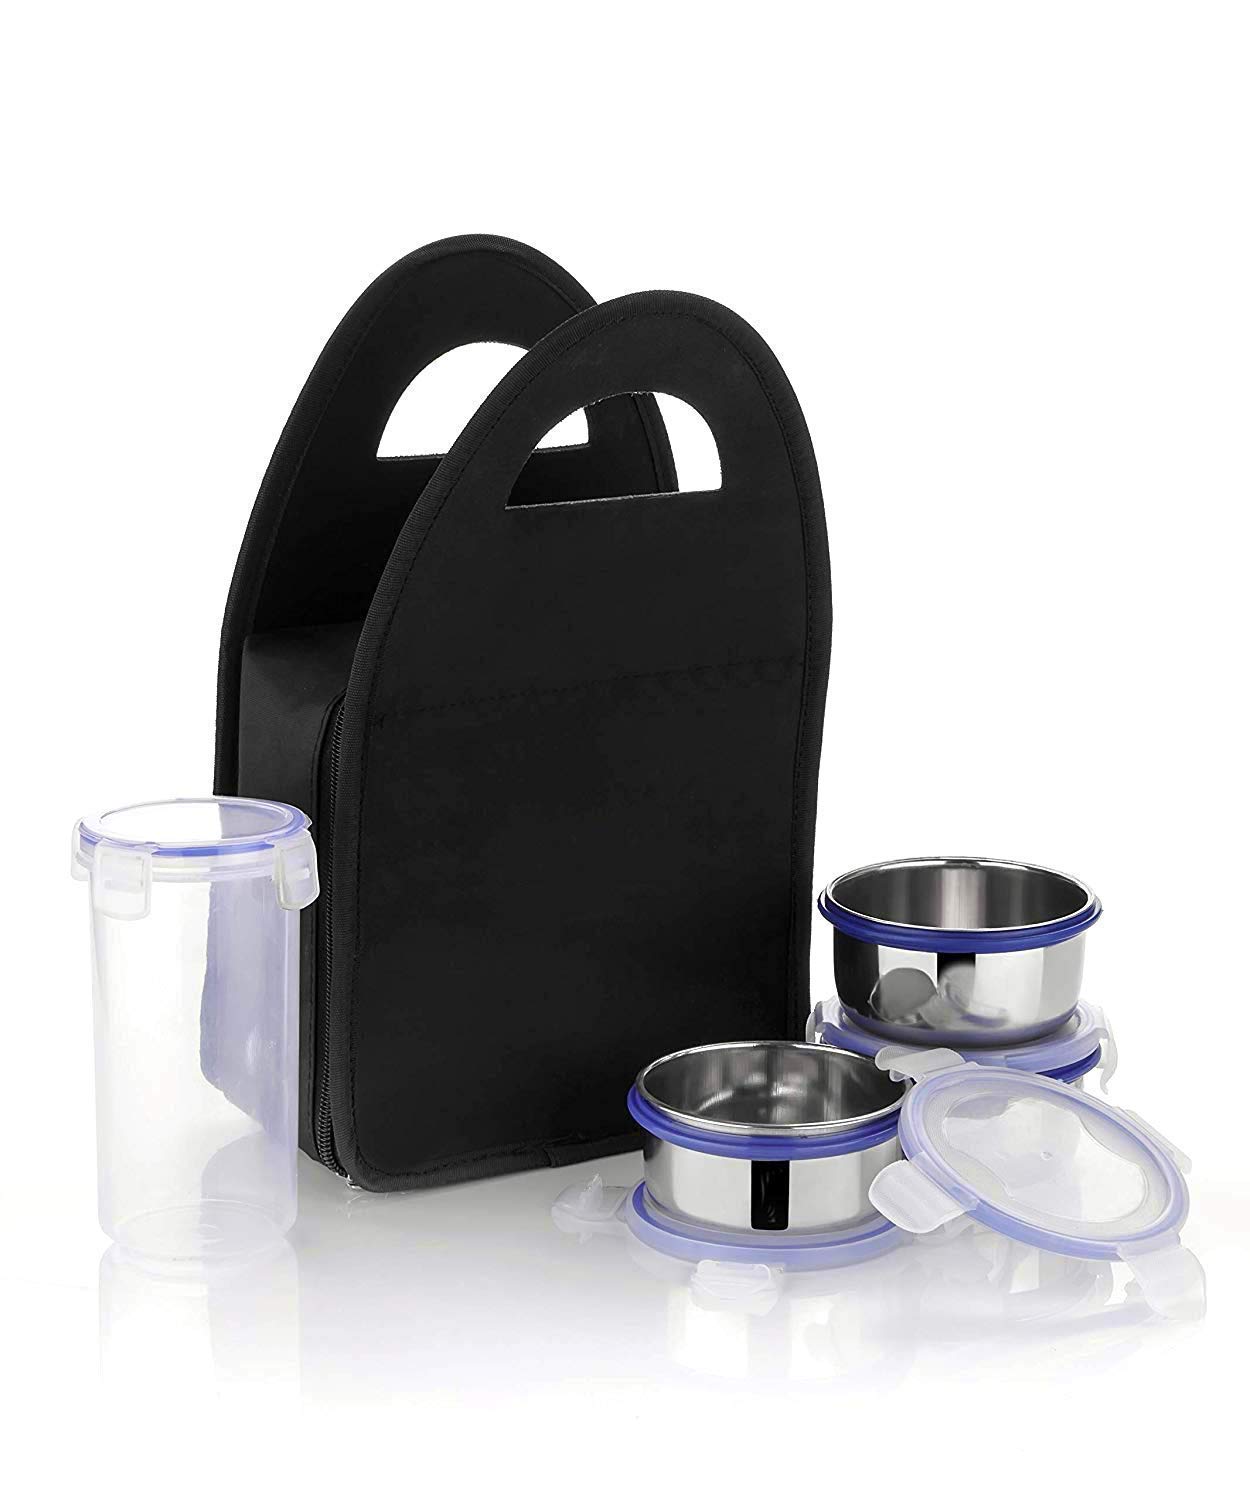 2201 Compact Stainless Steel Airtight Lunch Box Set - 4 pcs (3 Leakproof Containers and 1 Bottle) 